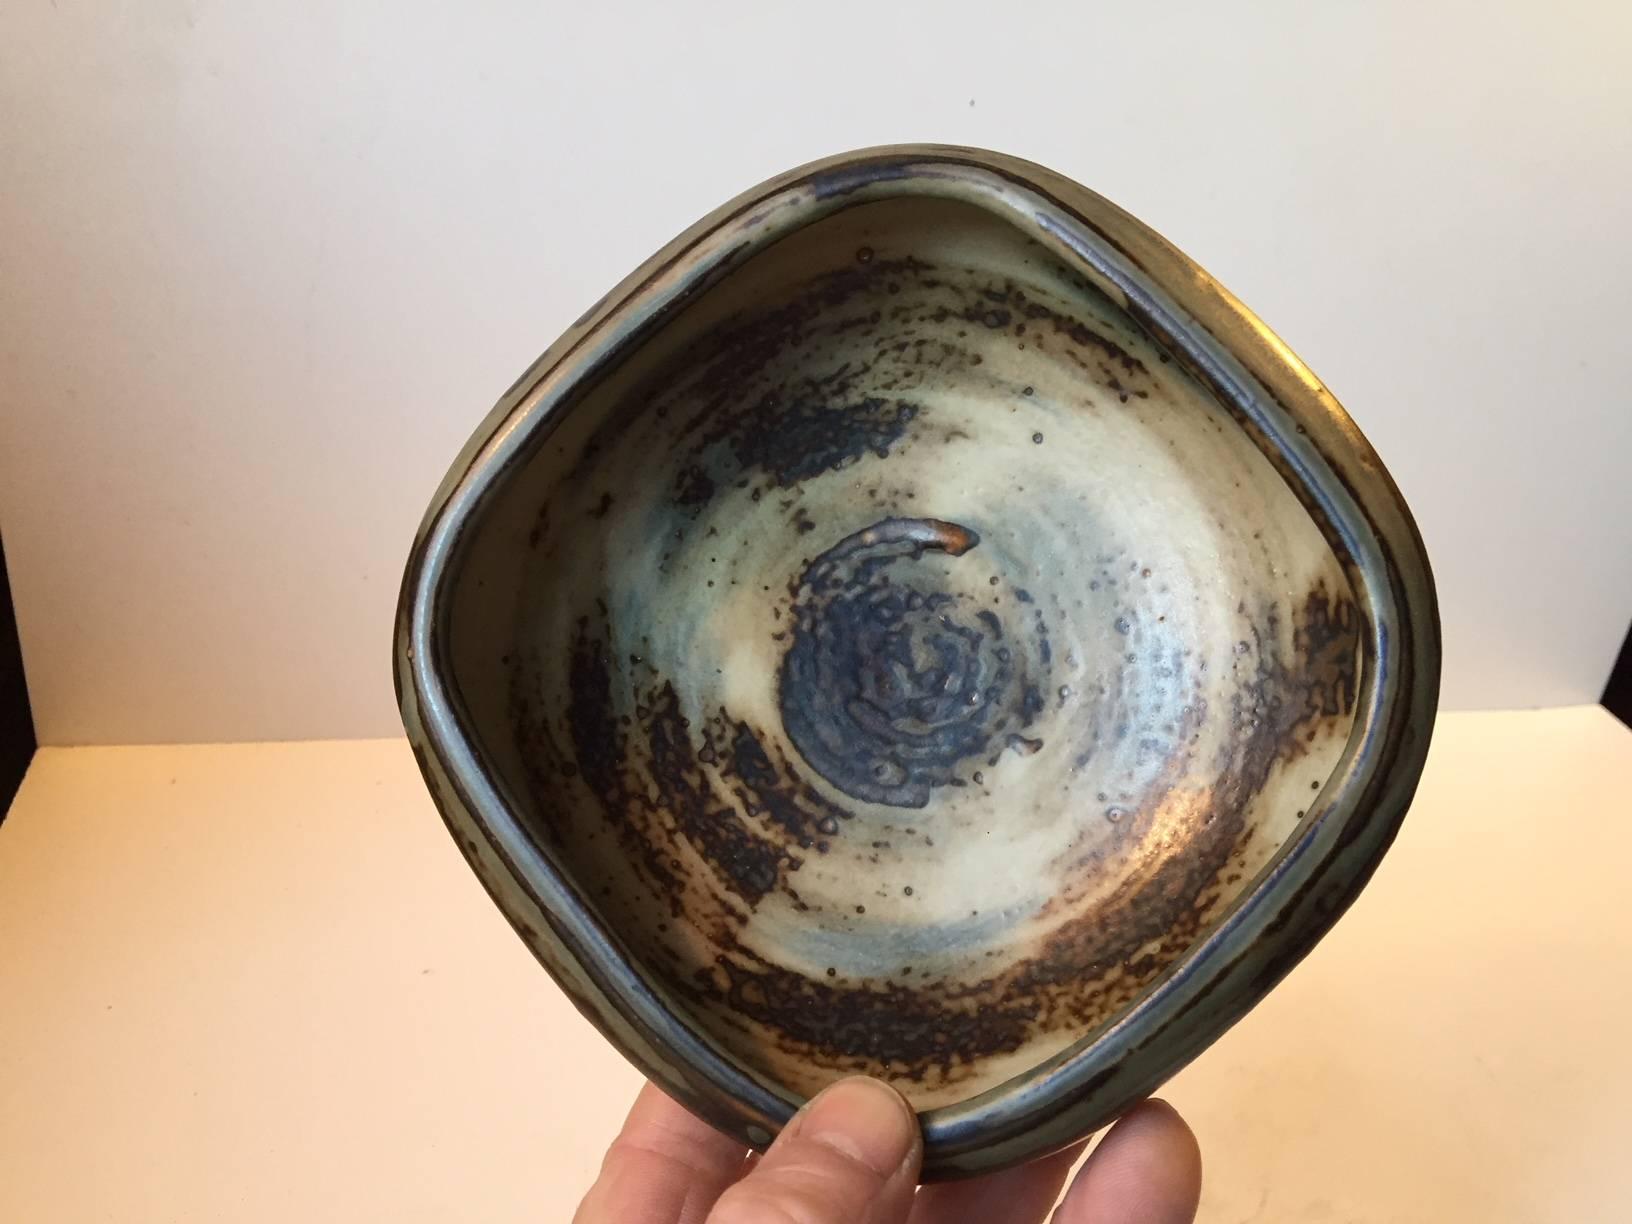 Organically shaped stoneware bowl in earthy sung and crystaline glazes. It was designed by Danish ceramist Bode Willumsen and manufactured by Royal Copenhagen in the late 1940s or early 1950s. Design number 20161.
Early on in his career Bode